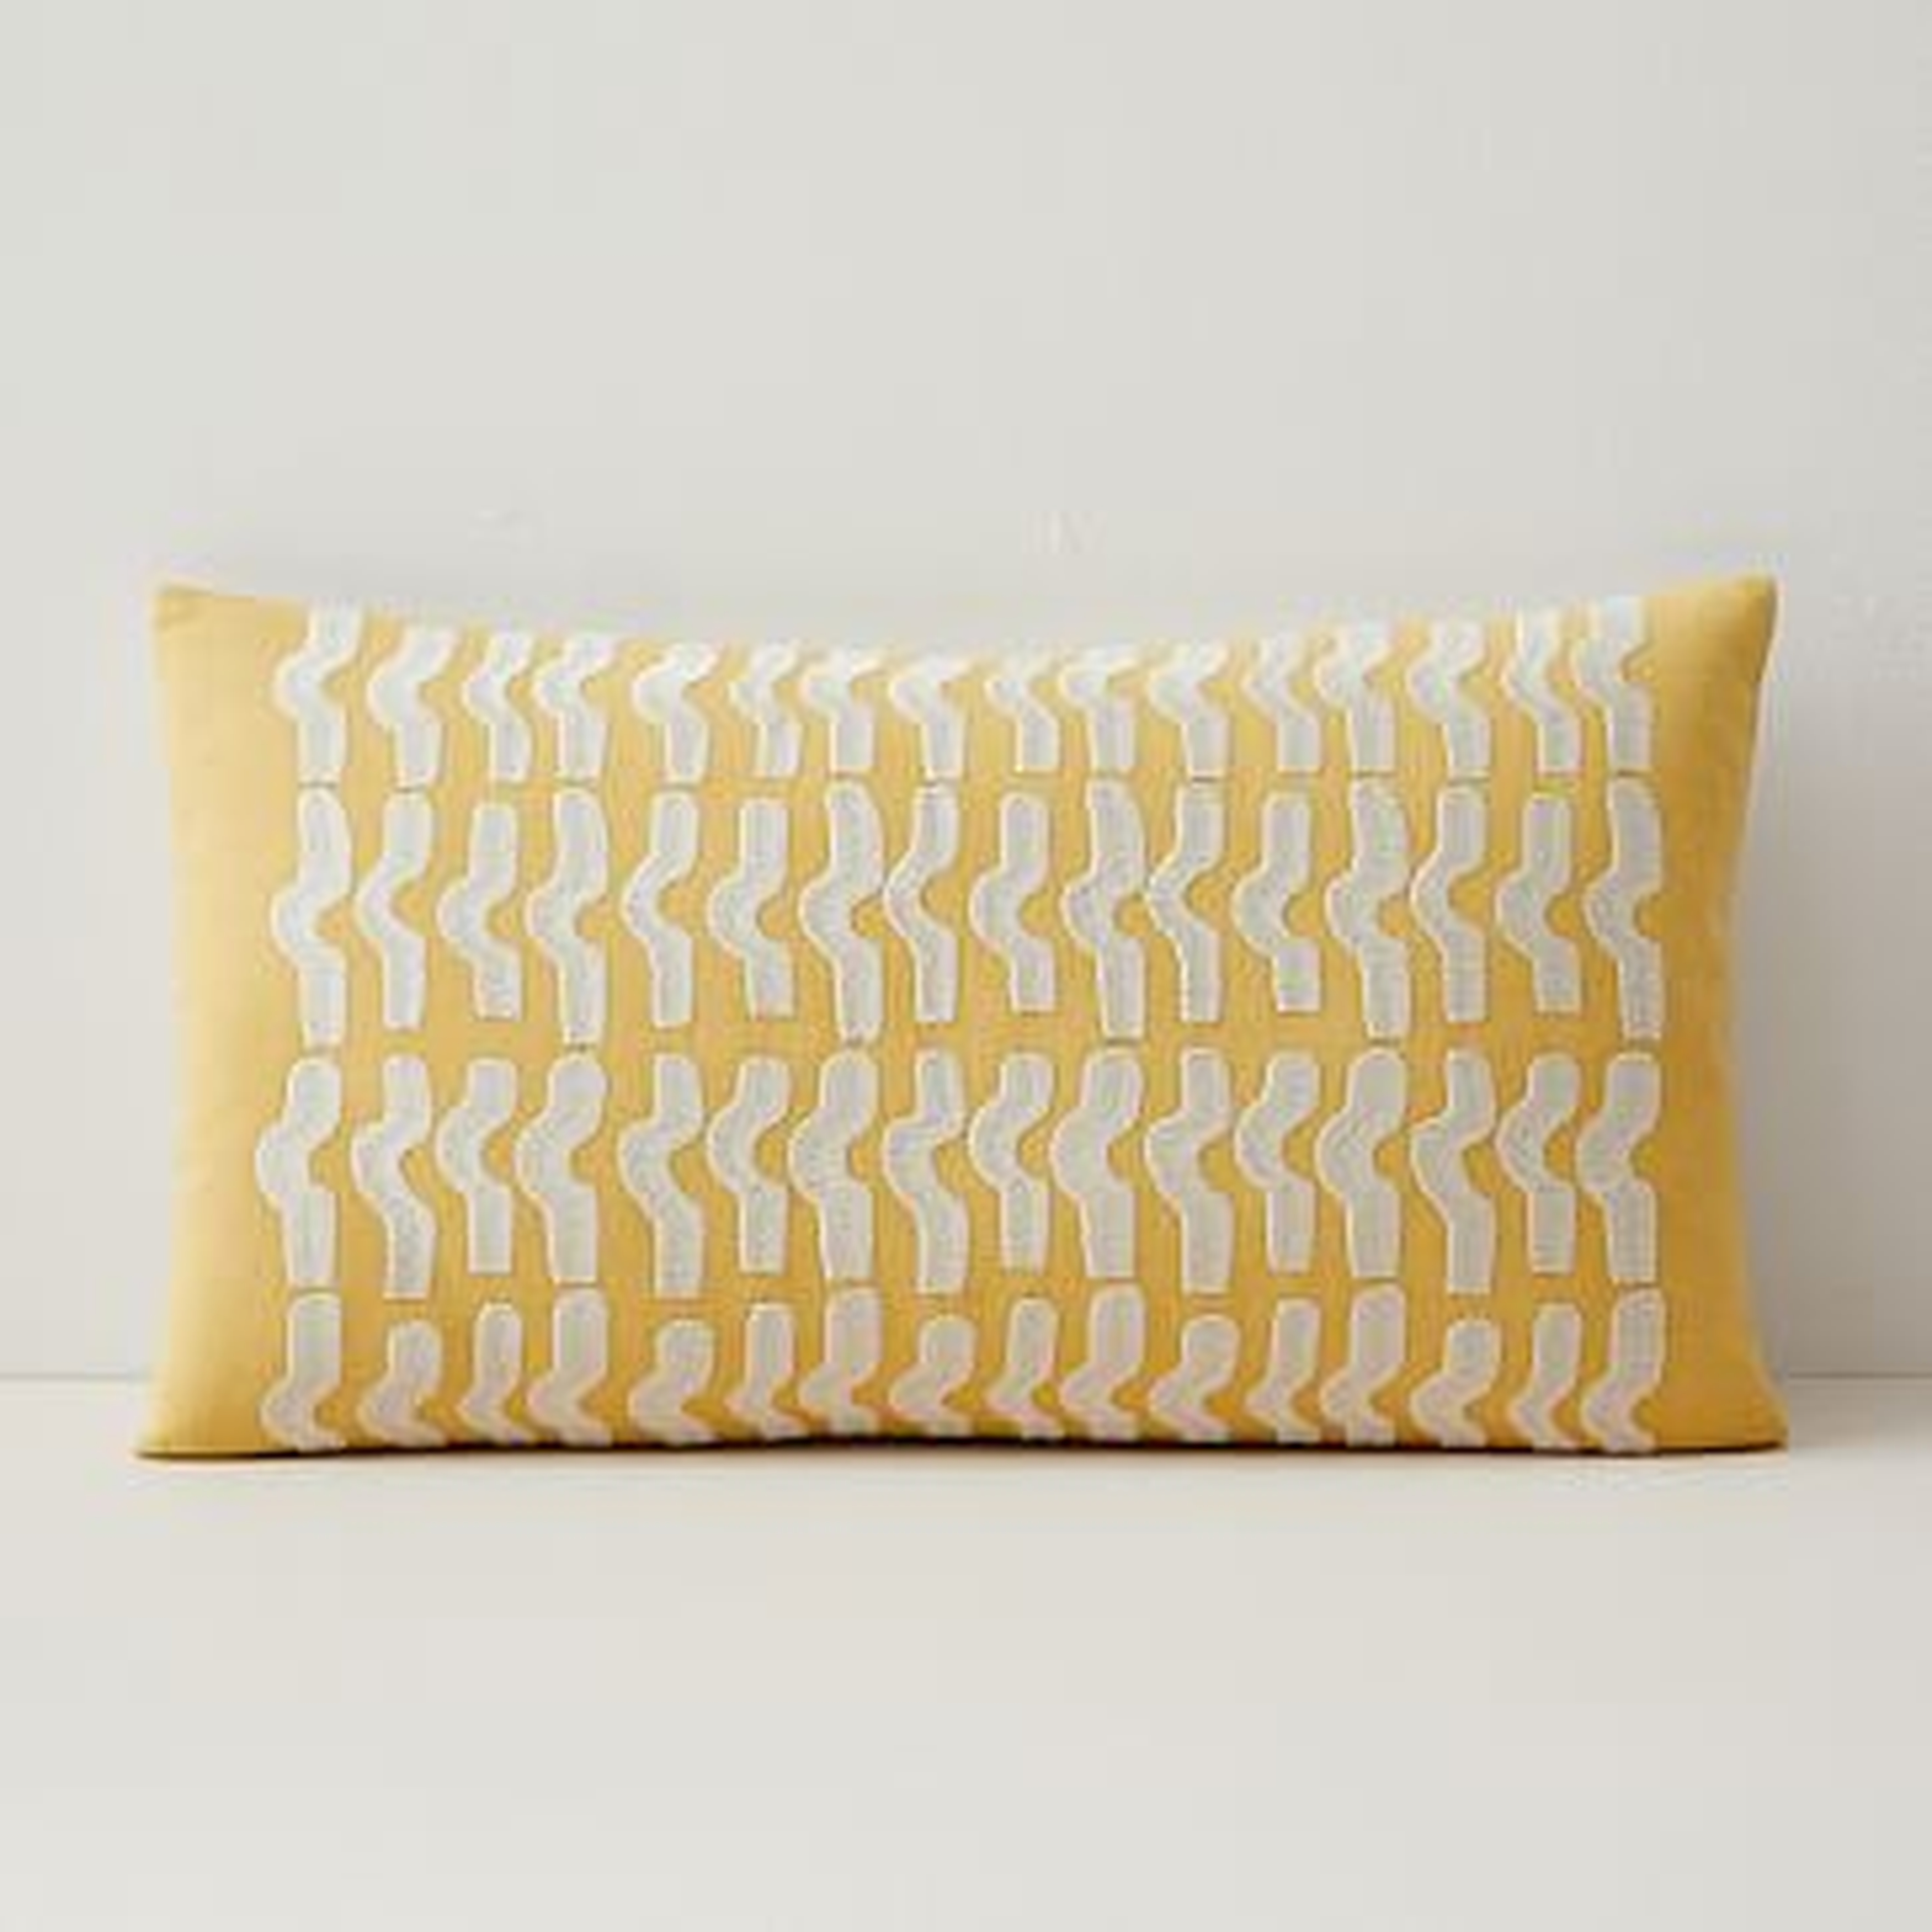 Floating Waves Lumbar Pillow Cover, 12"x21", Yellow Stone - West Elm